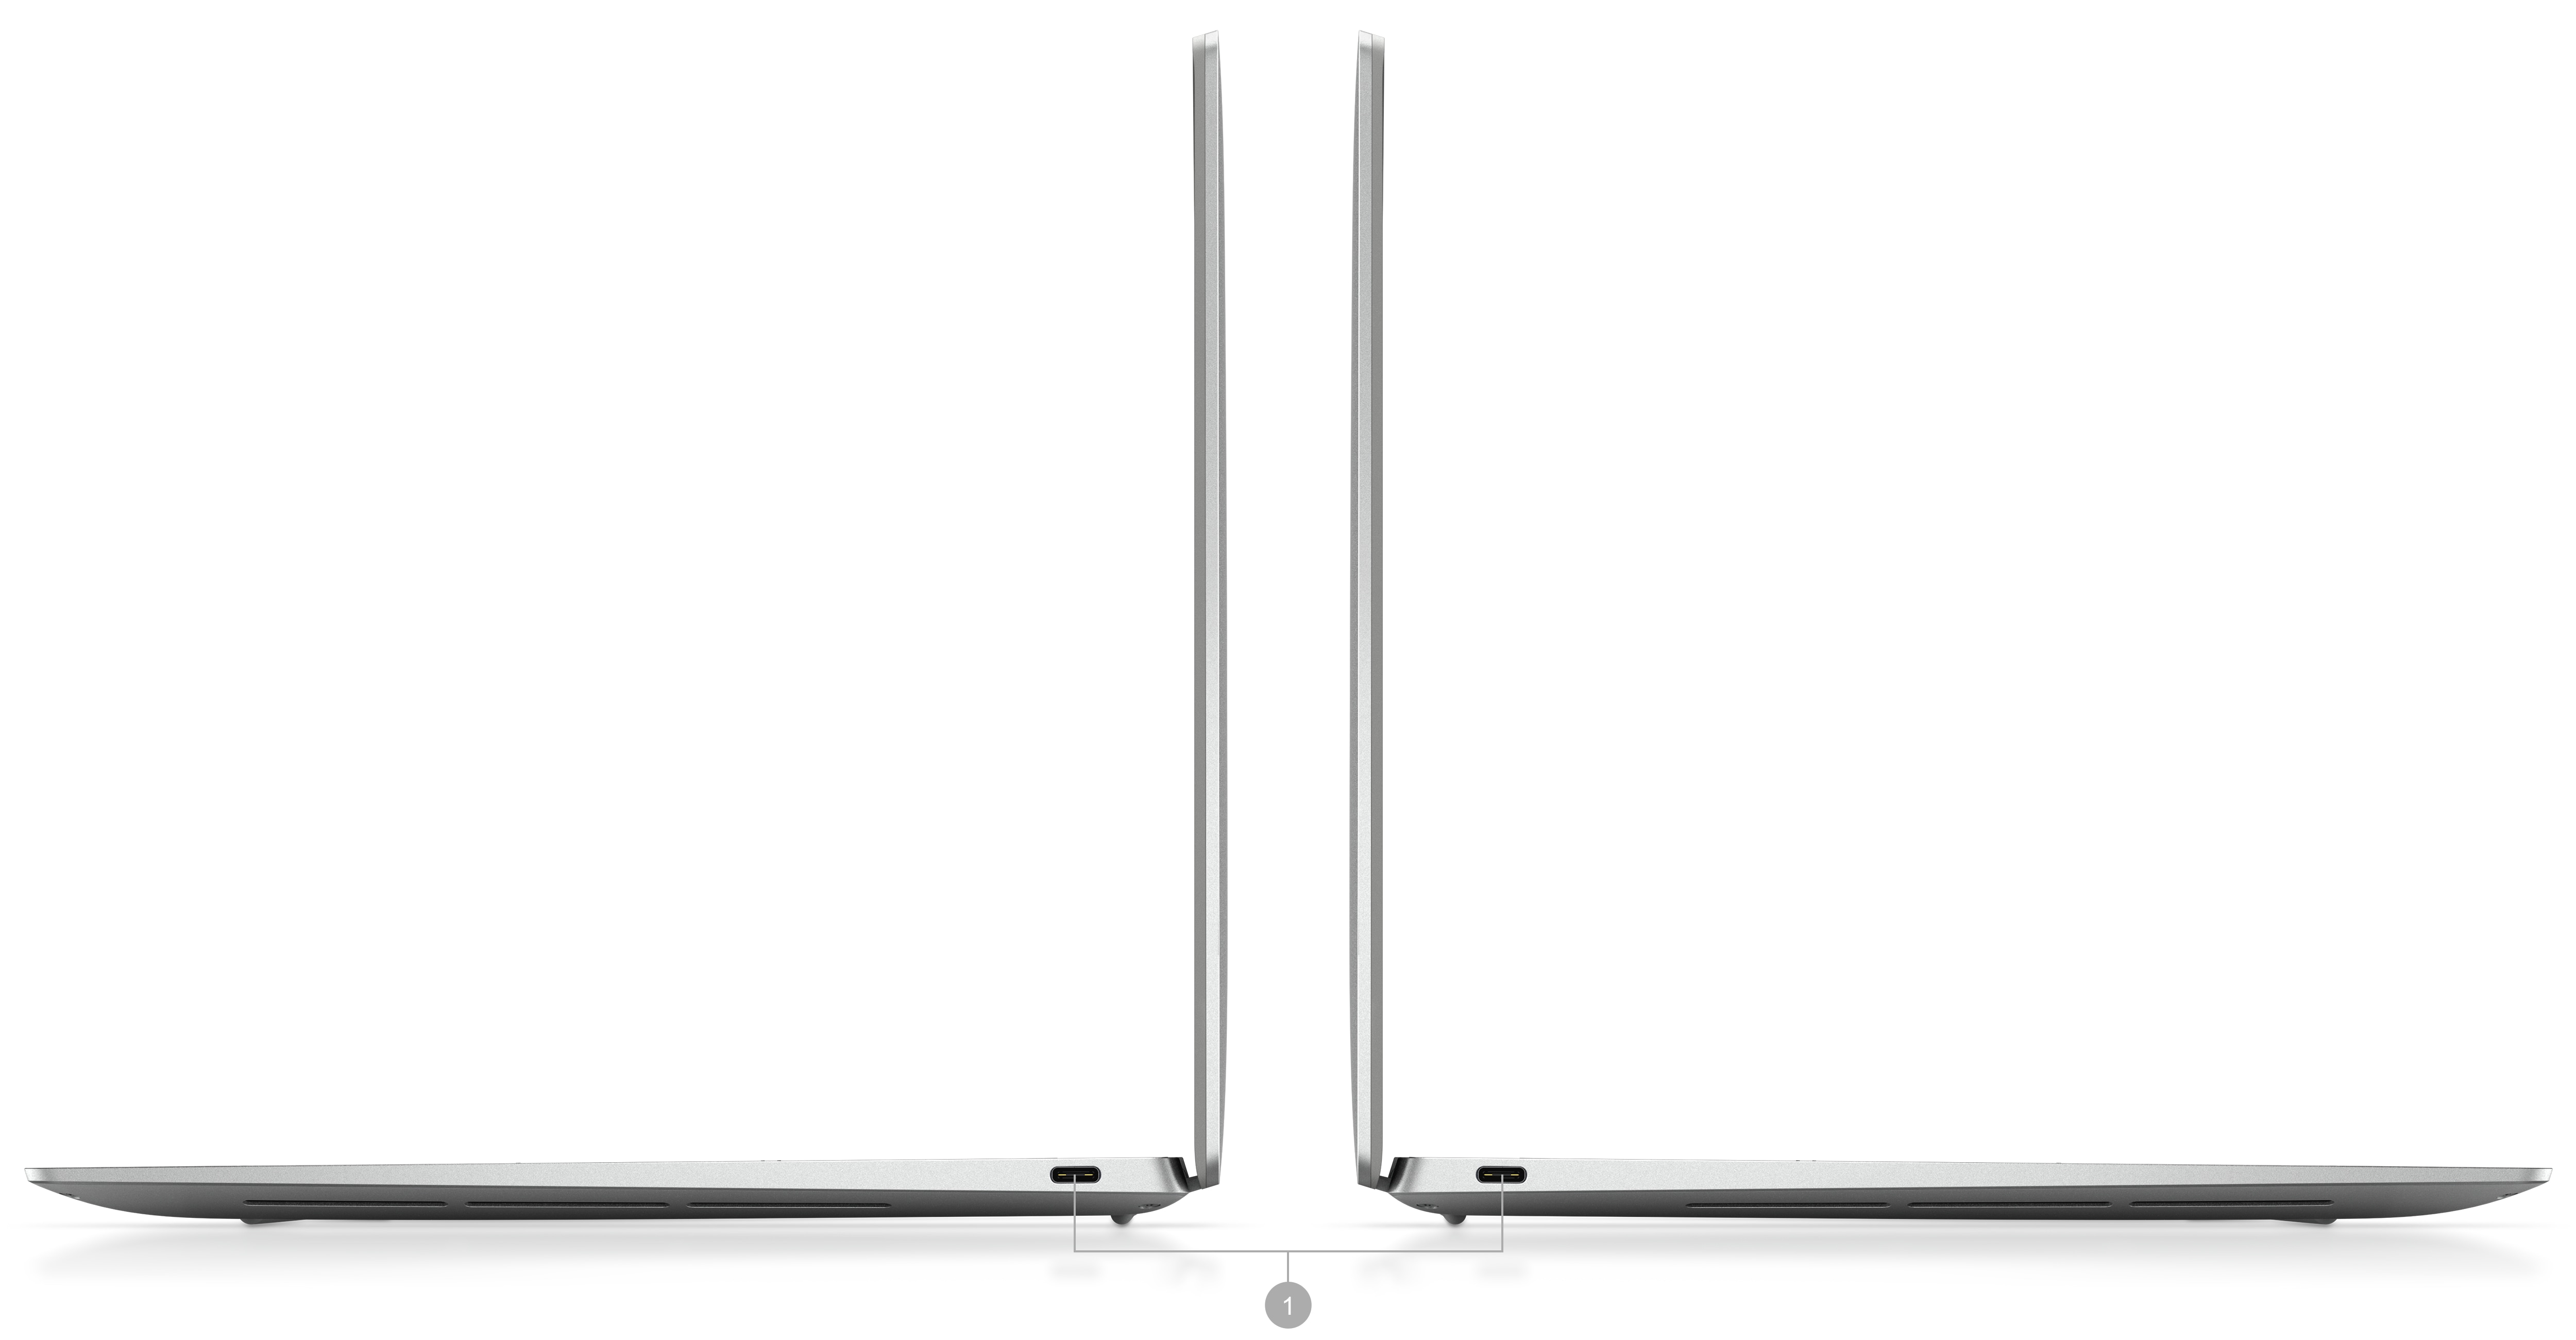 Picture of Dell XPS 13 9320 laptops placed sideways with the number 1 signaling the product ports and slots. 